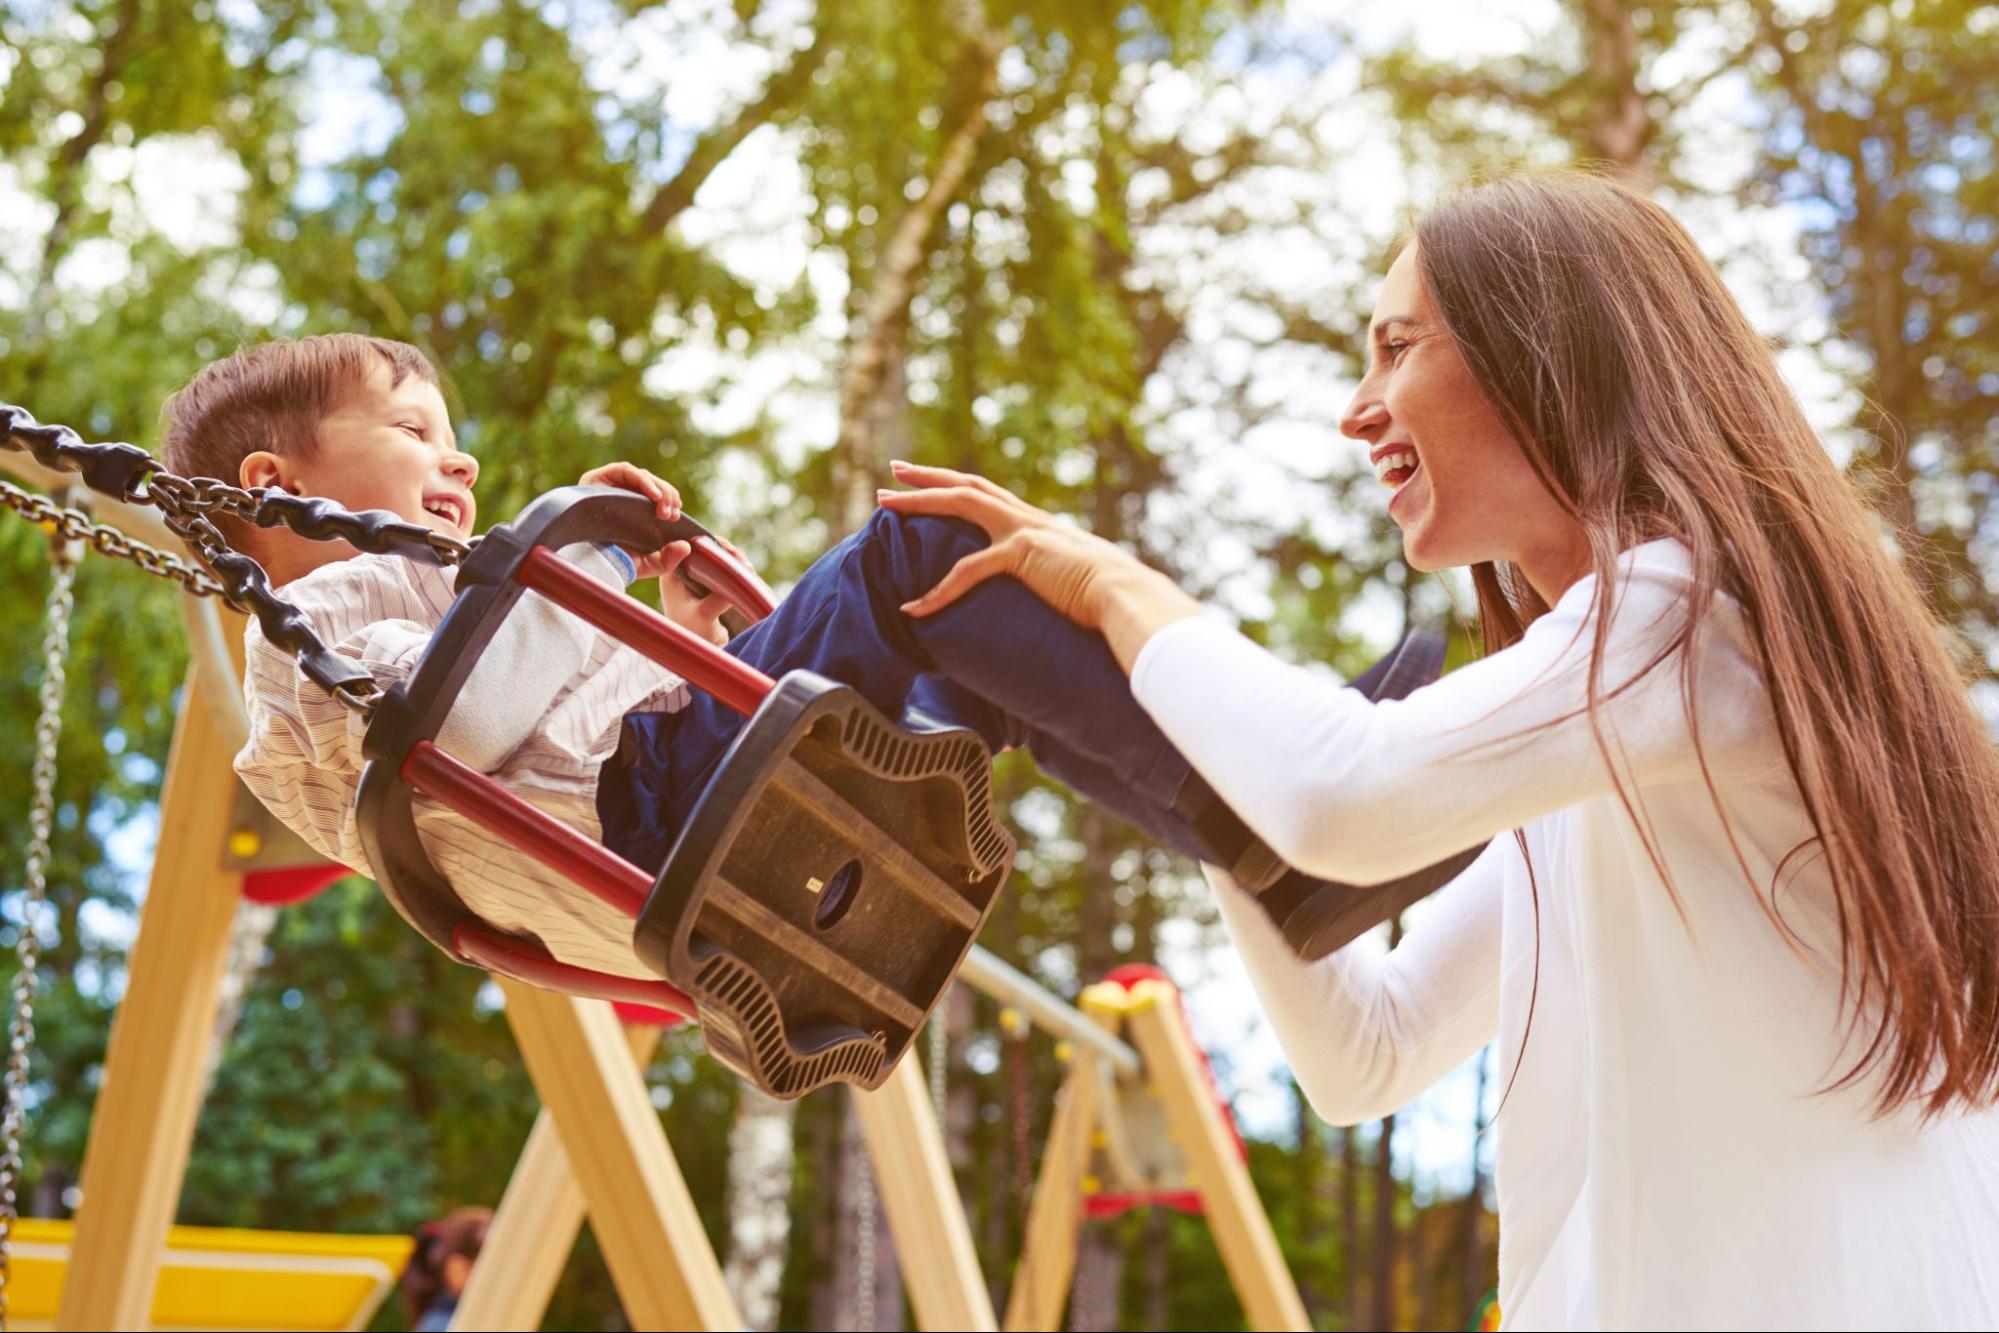 This is an image of a mother pushing her child on a playground swing.